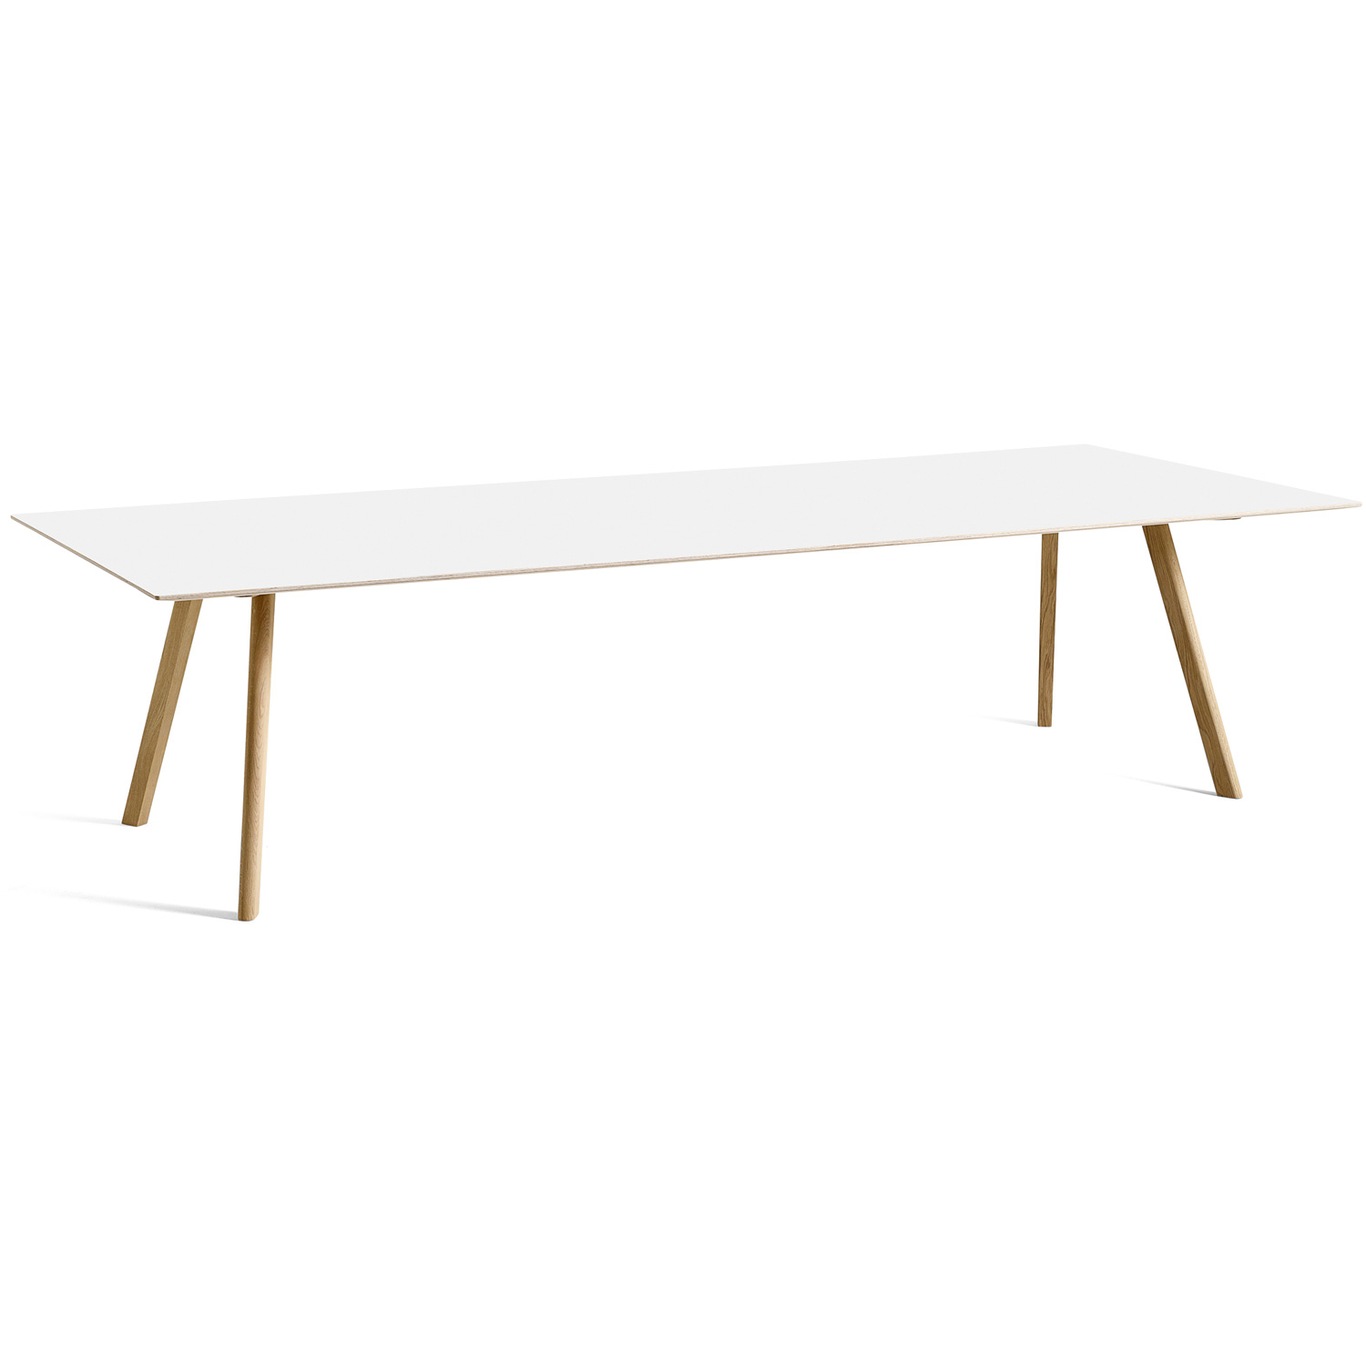 CPH 30 Table 250x120 cm, Water-based Lacquered Oak / White Laminate